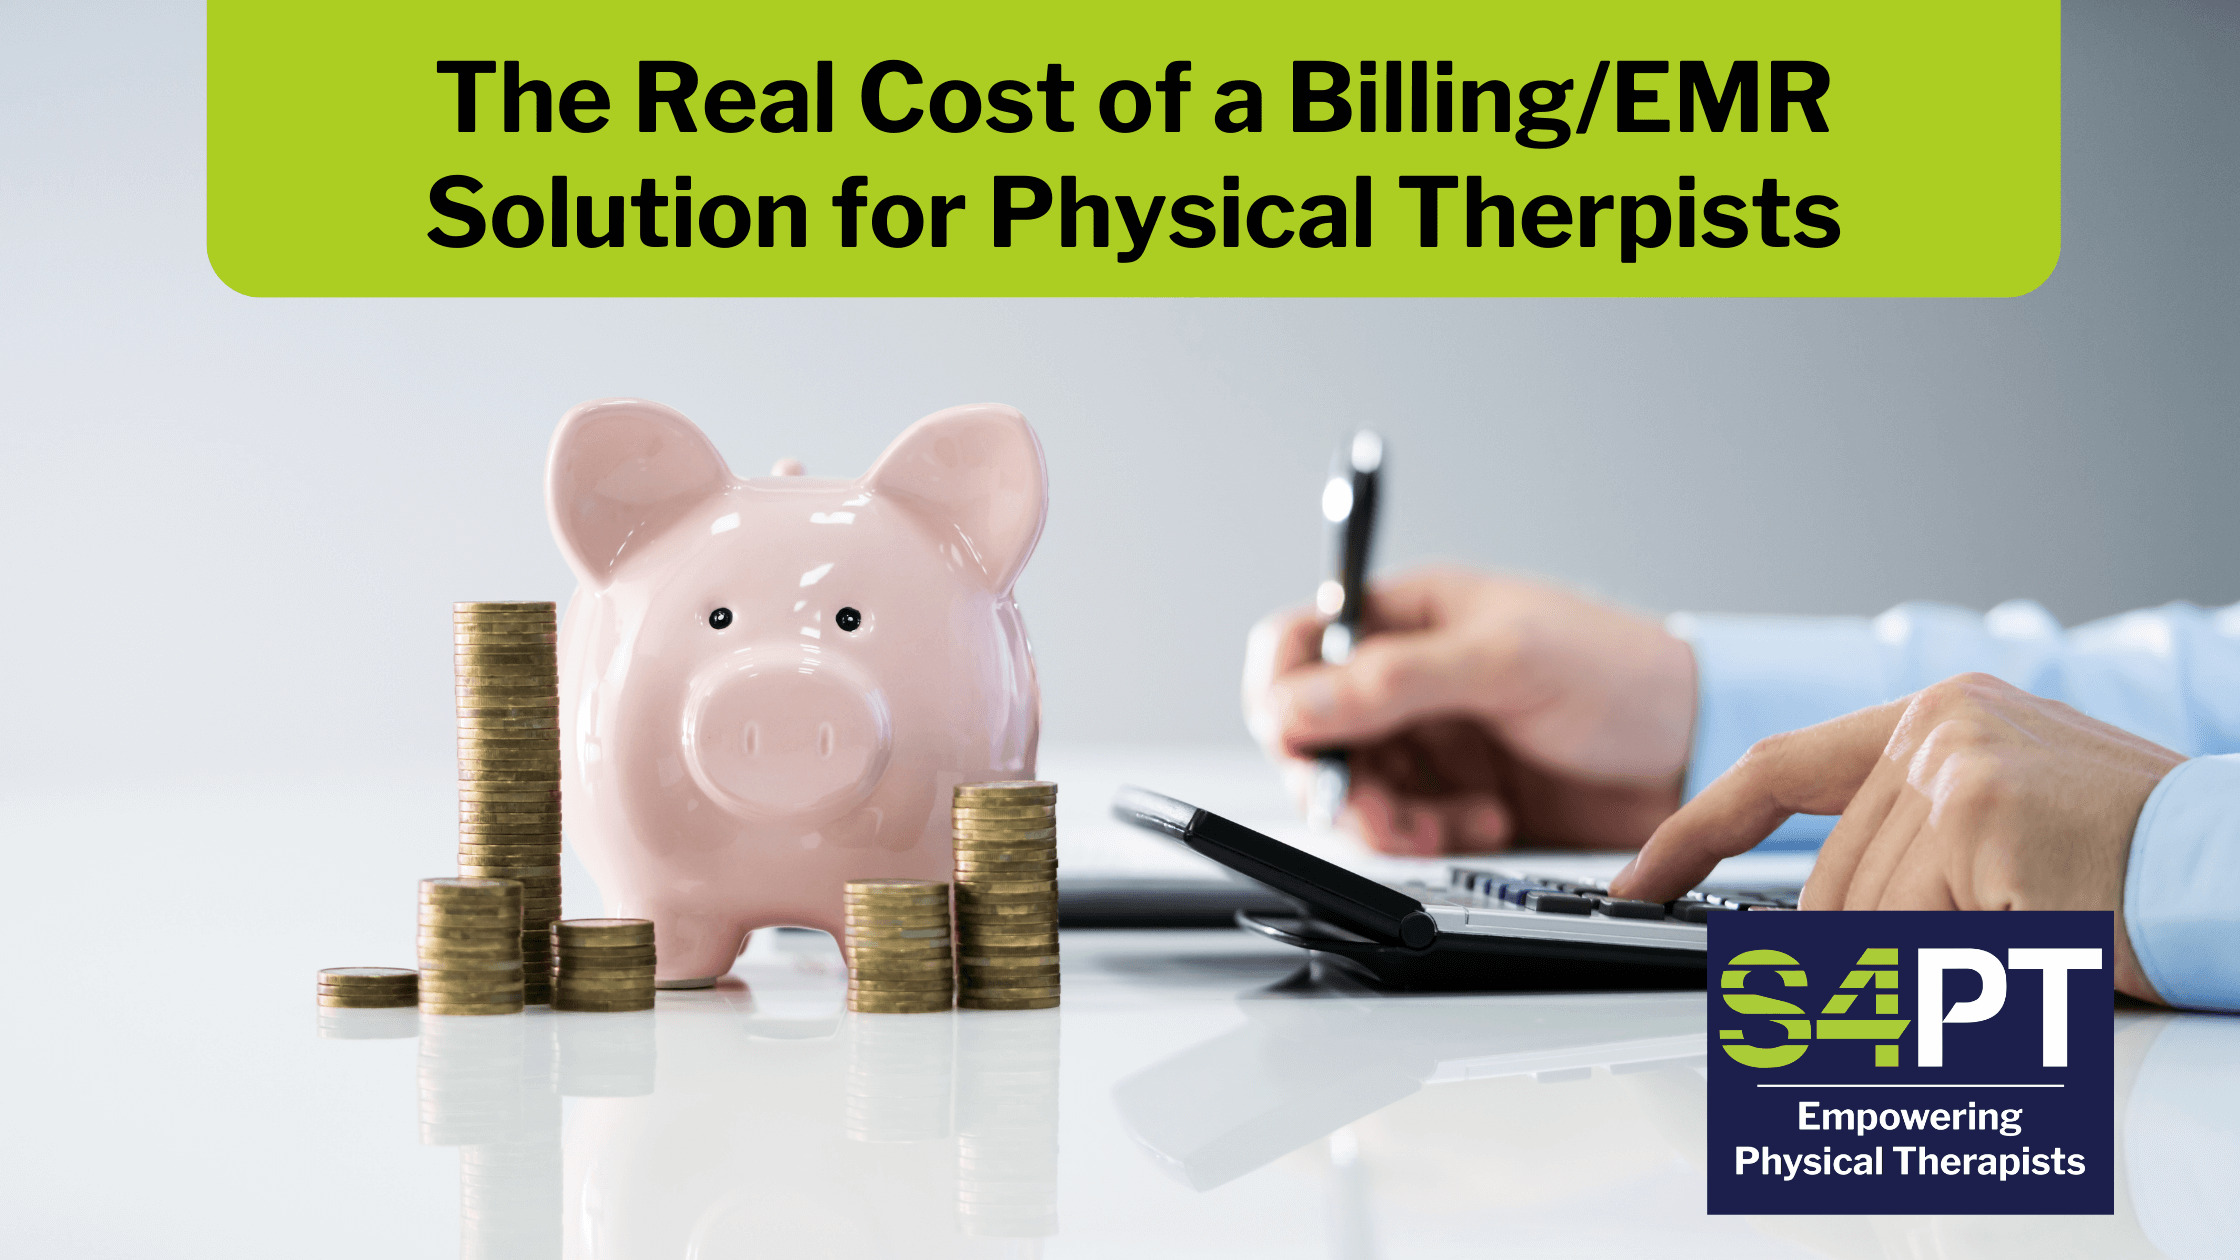 The Real Cost of a Billing/EMR Solution for Physical Therapists